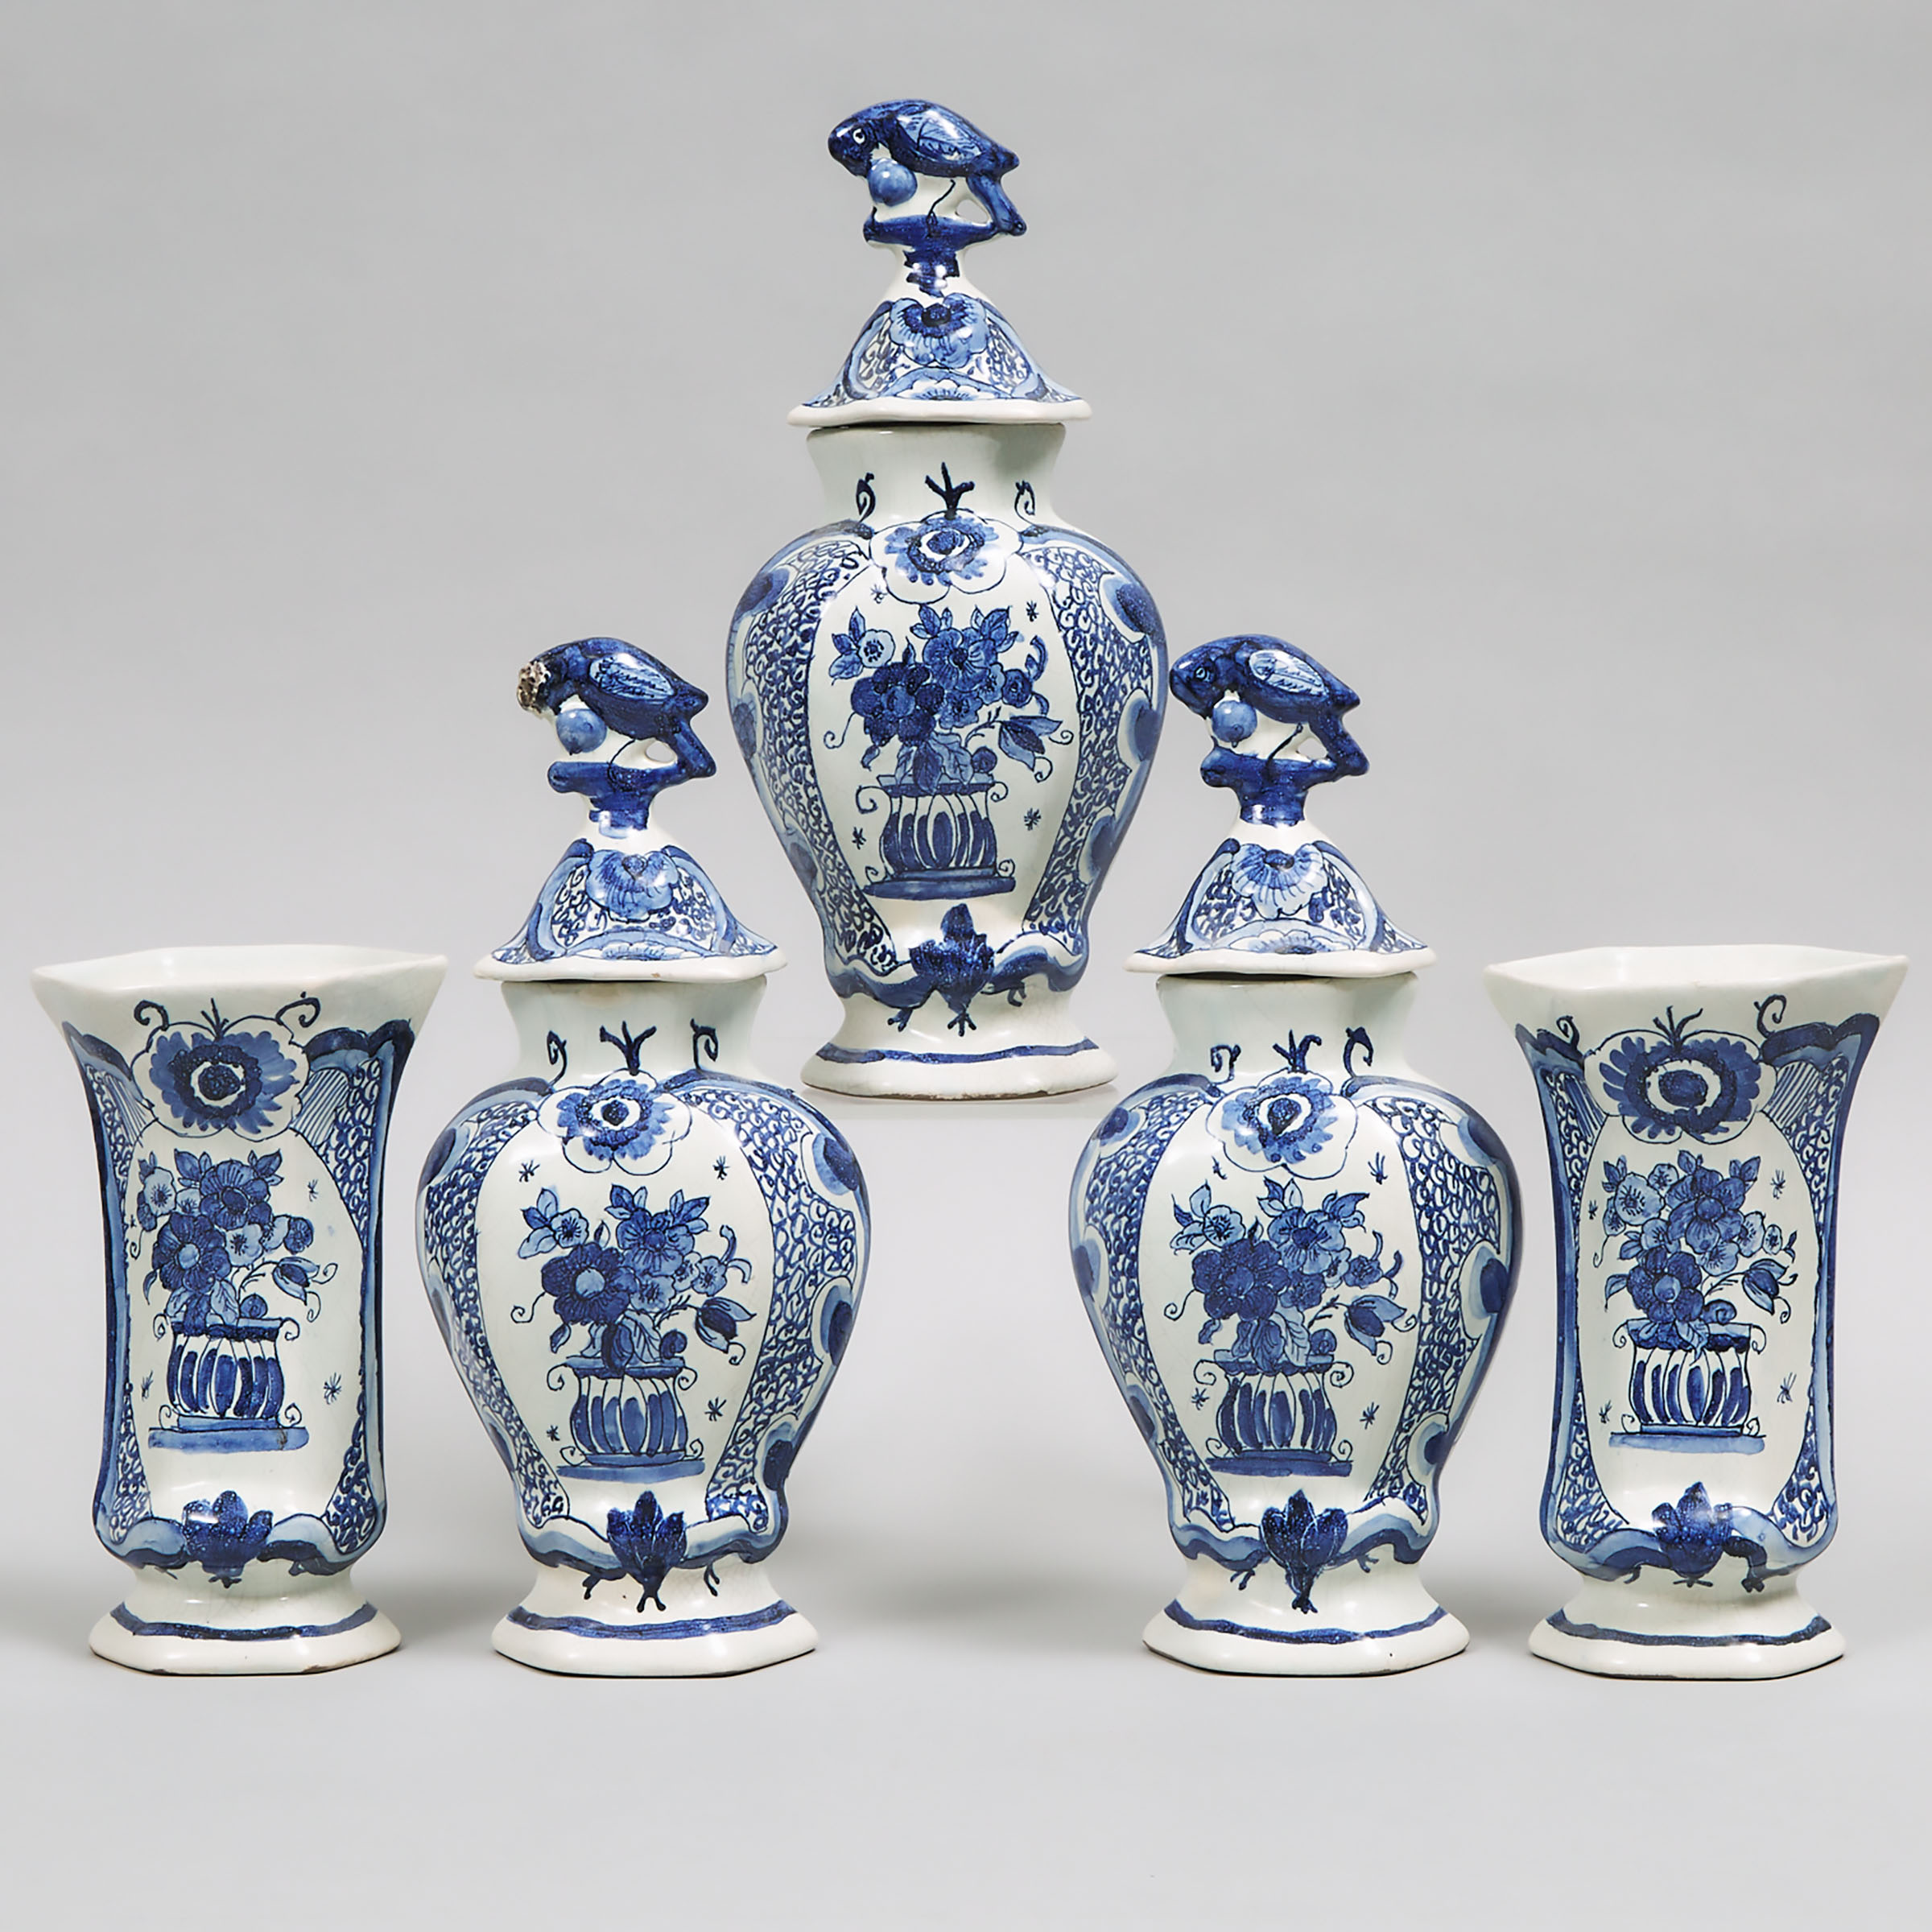 Garniture of Five Delft Blue Painted Vases, Three with Covers, 19th/20th century